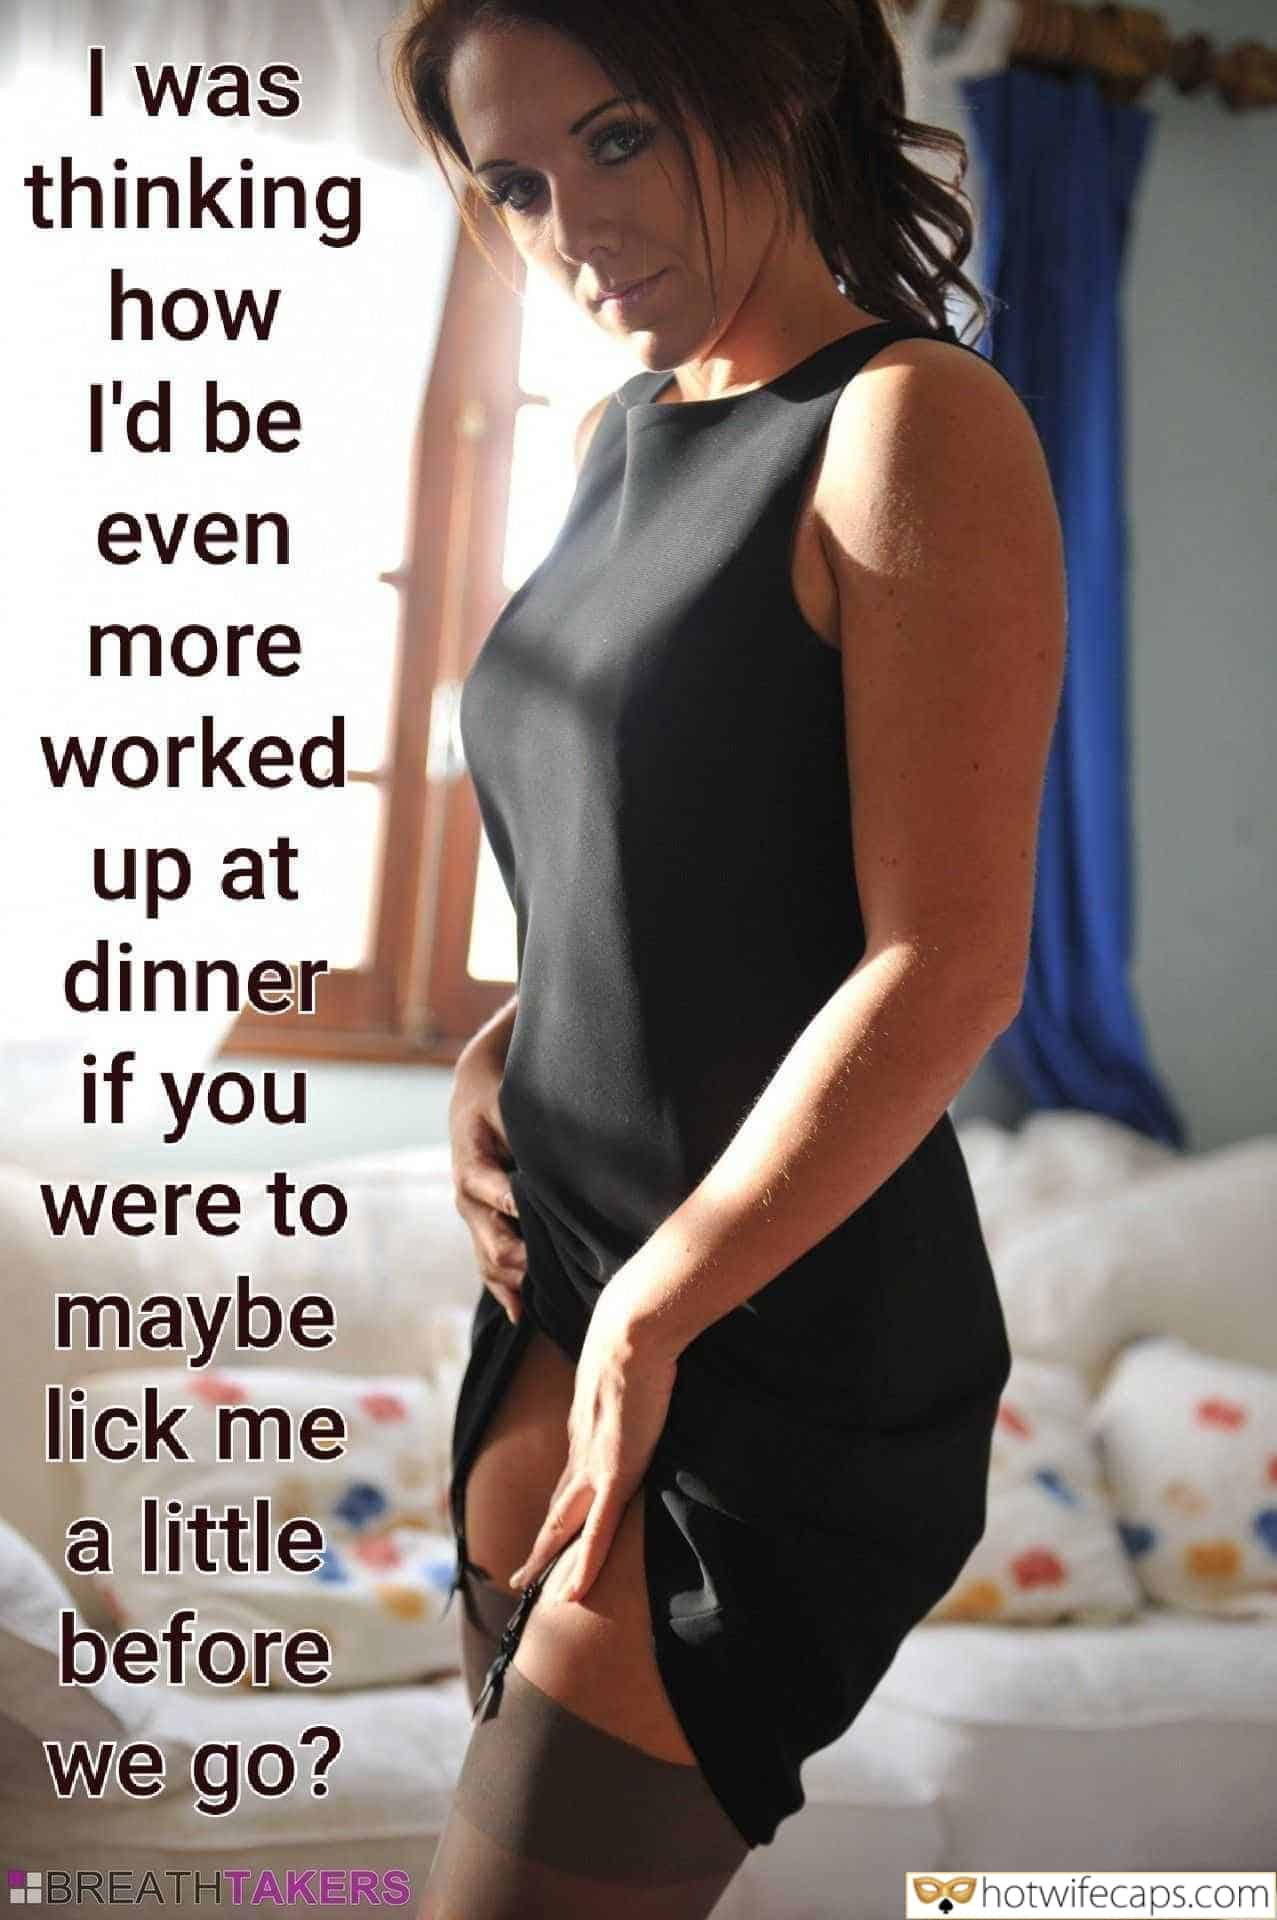 Wife Sharing Sexy Memes Cuckold Cleanup Cheating hotwife caption: I was thinking how I’d be even more worked up at dinner if you were to maybe lick me a little before we go? Stunning Wife in a Black Dress